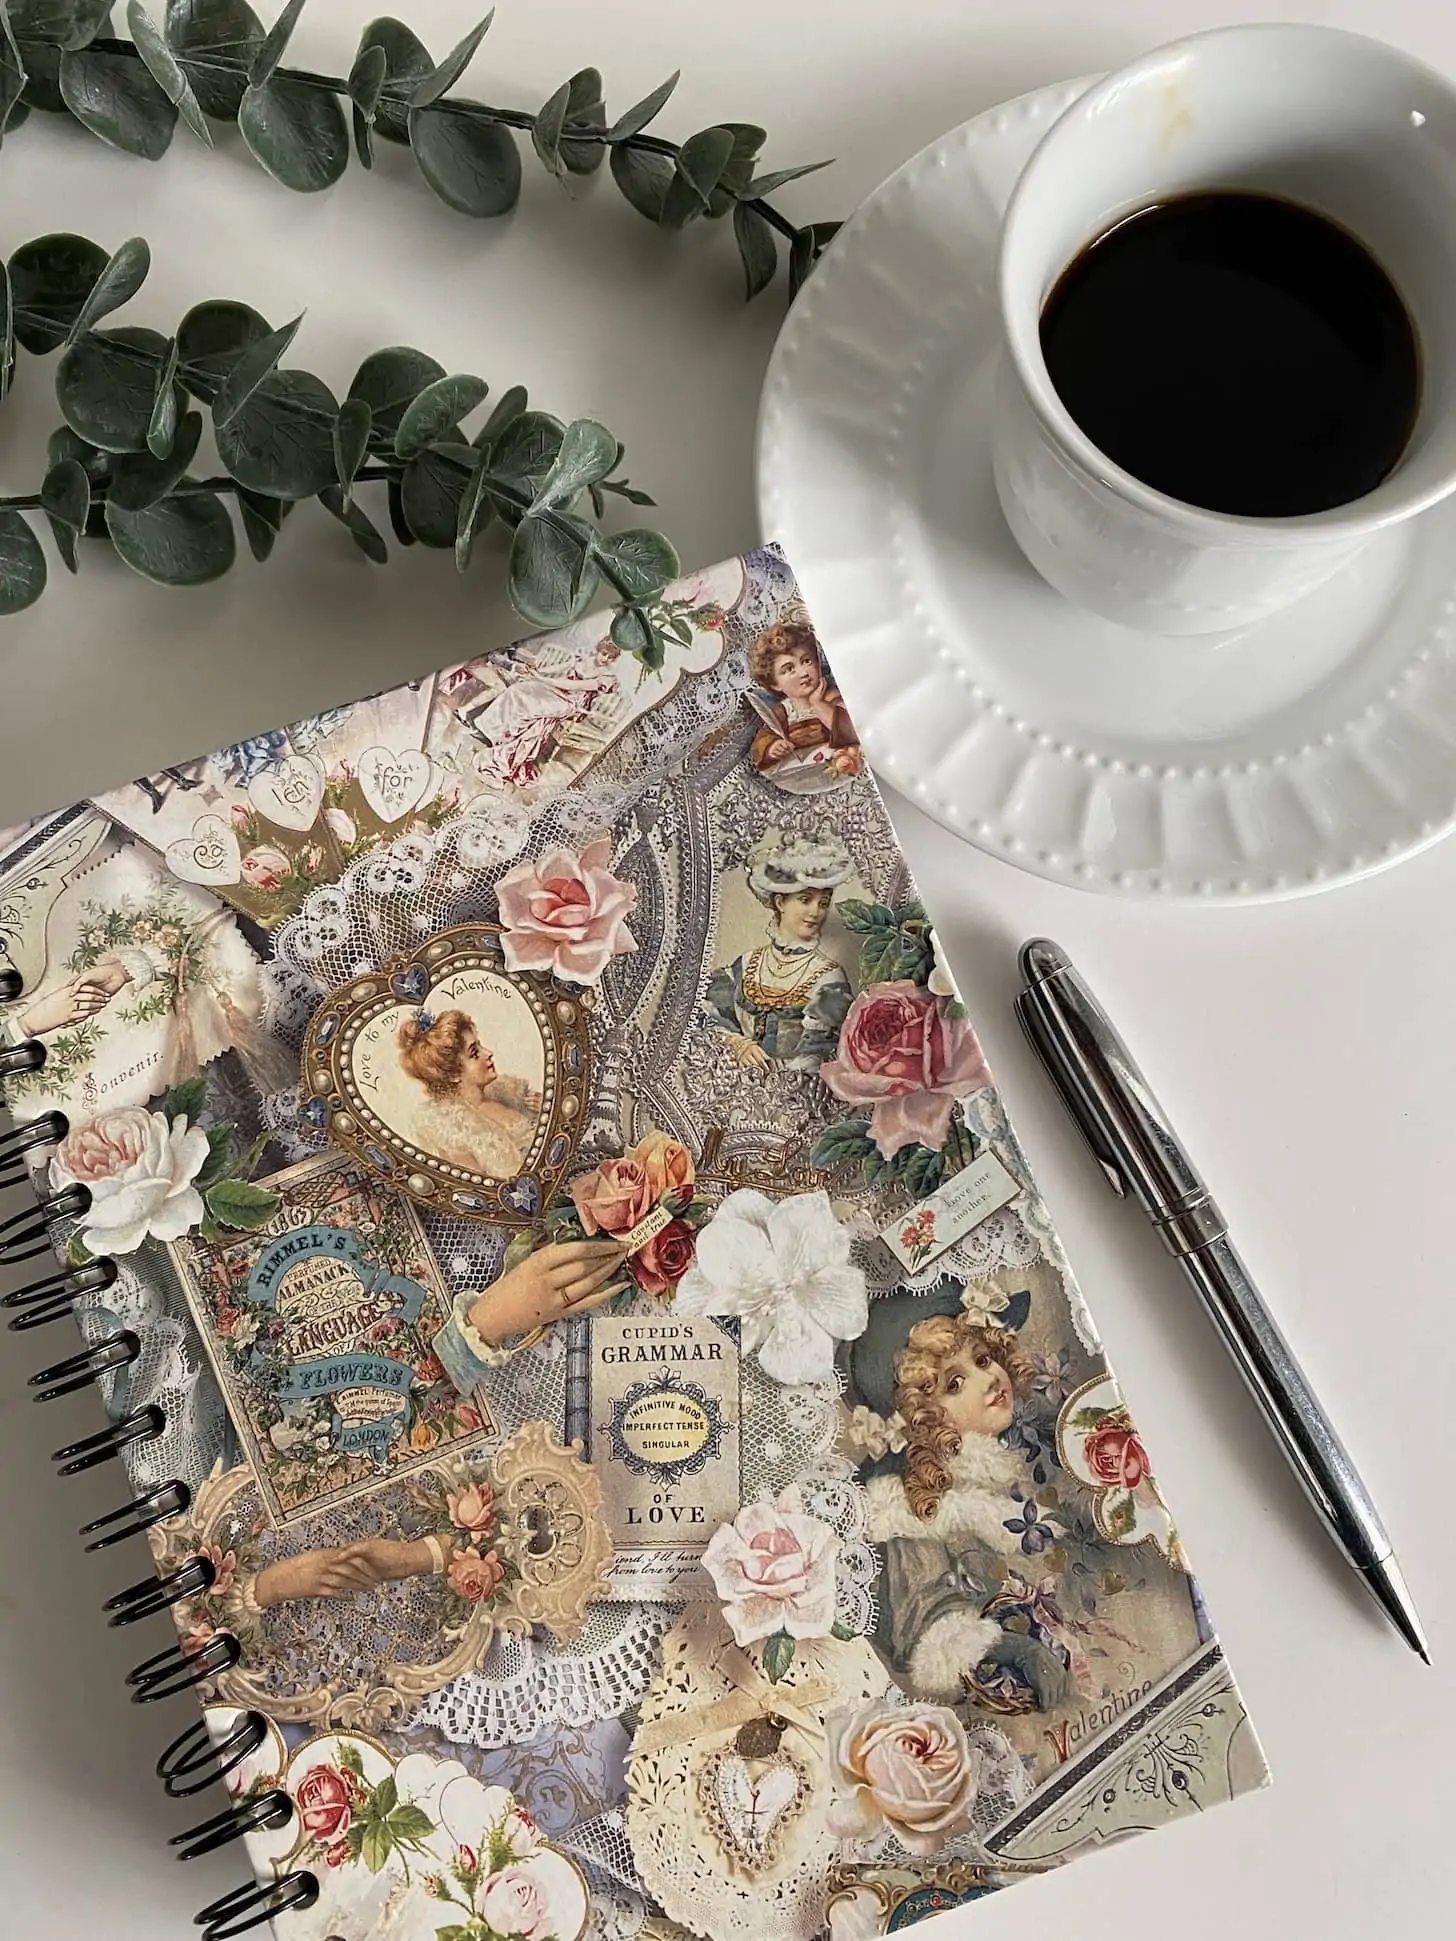 a floral journal with a pen, a cup of coffee and a plant close by.